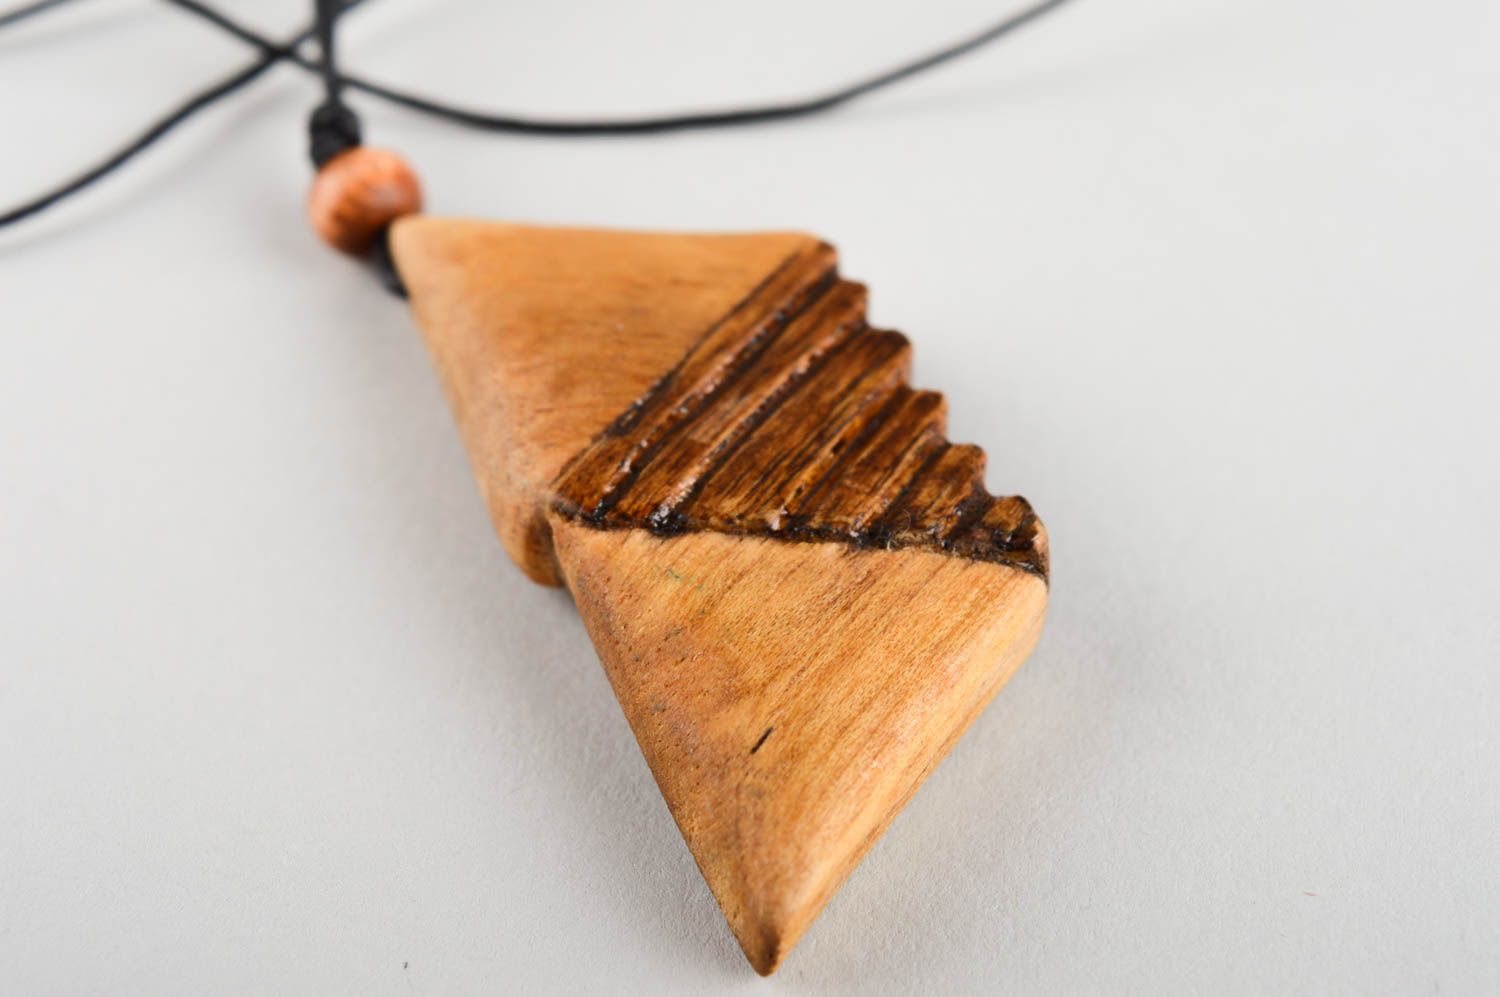 Stylish handmade wooden pendant artisan jewelry designs wood craft gifts for her photo 5